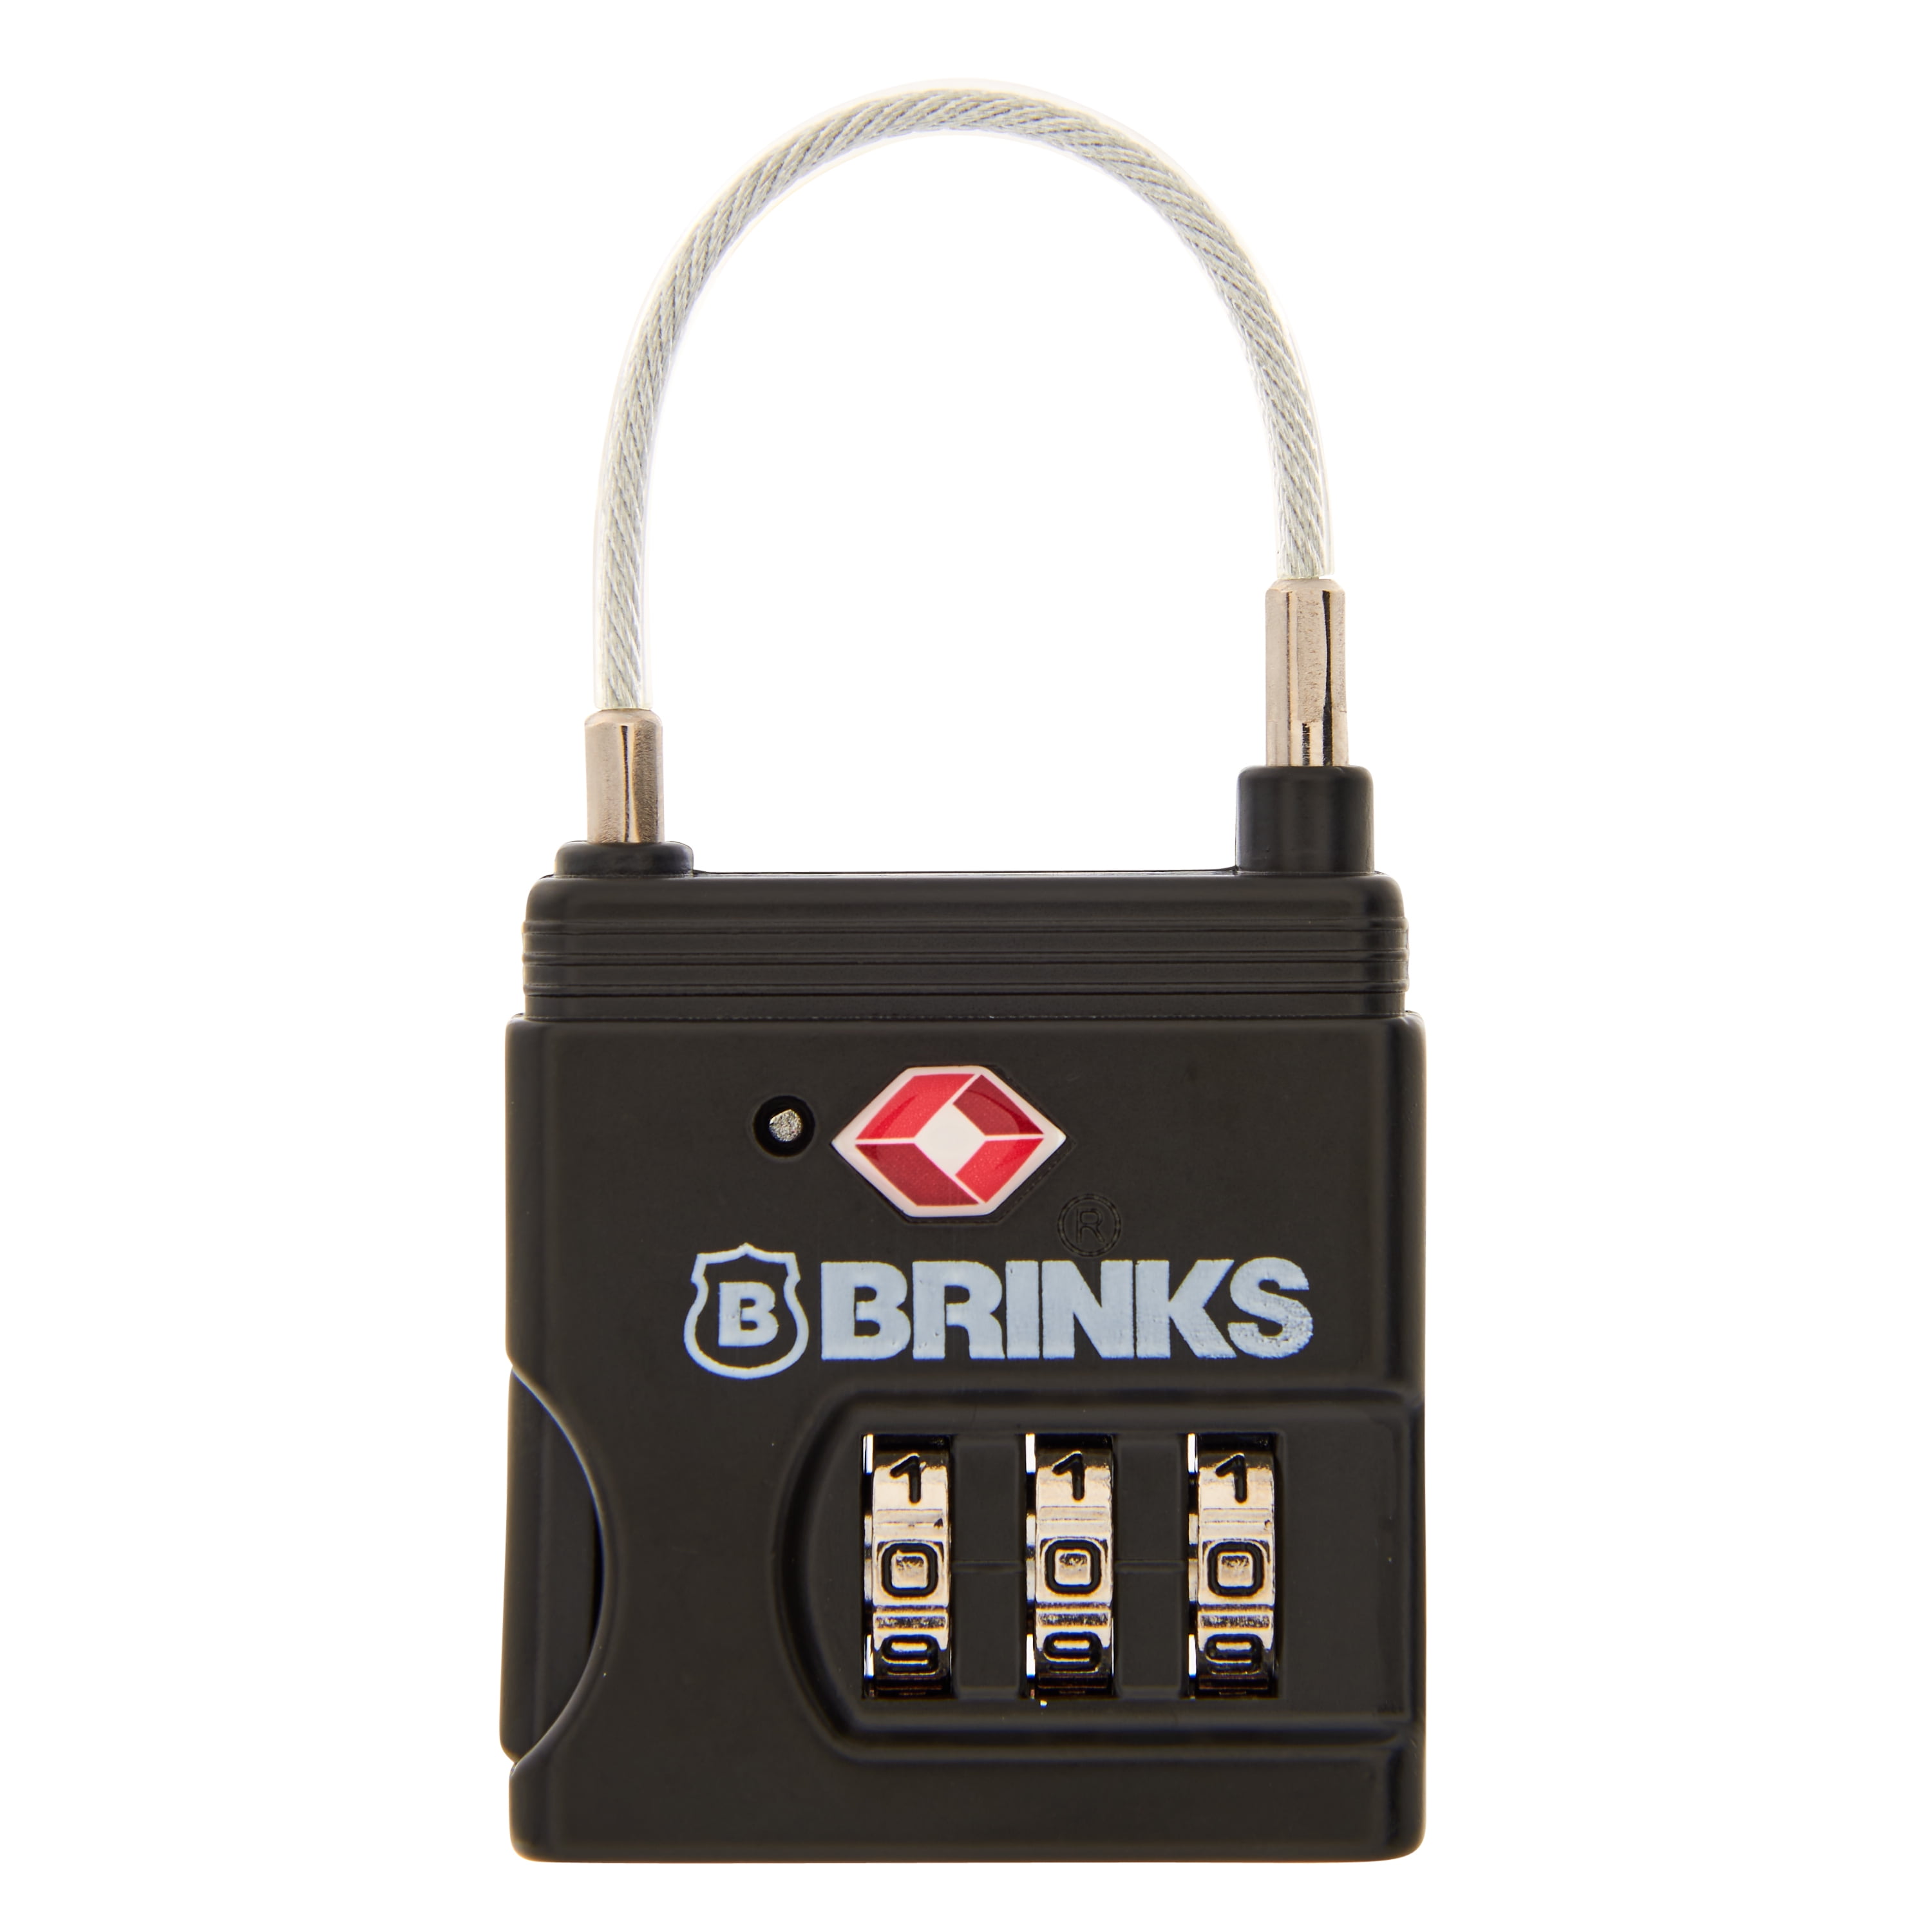 Brinks 25mm TSA Combination Luggage Padlock with Flexible Braided Cable Shackle